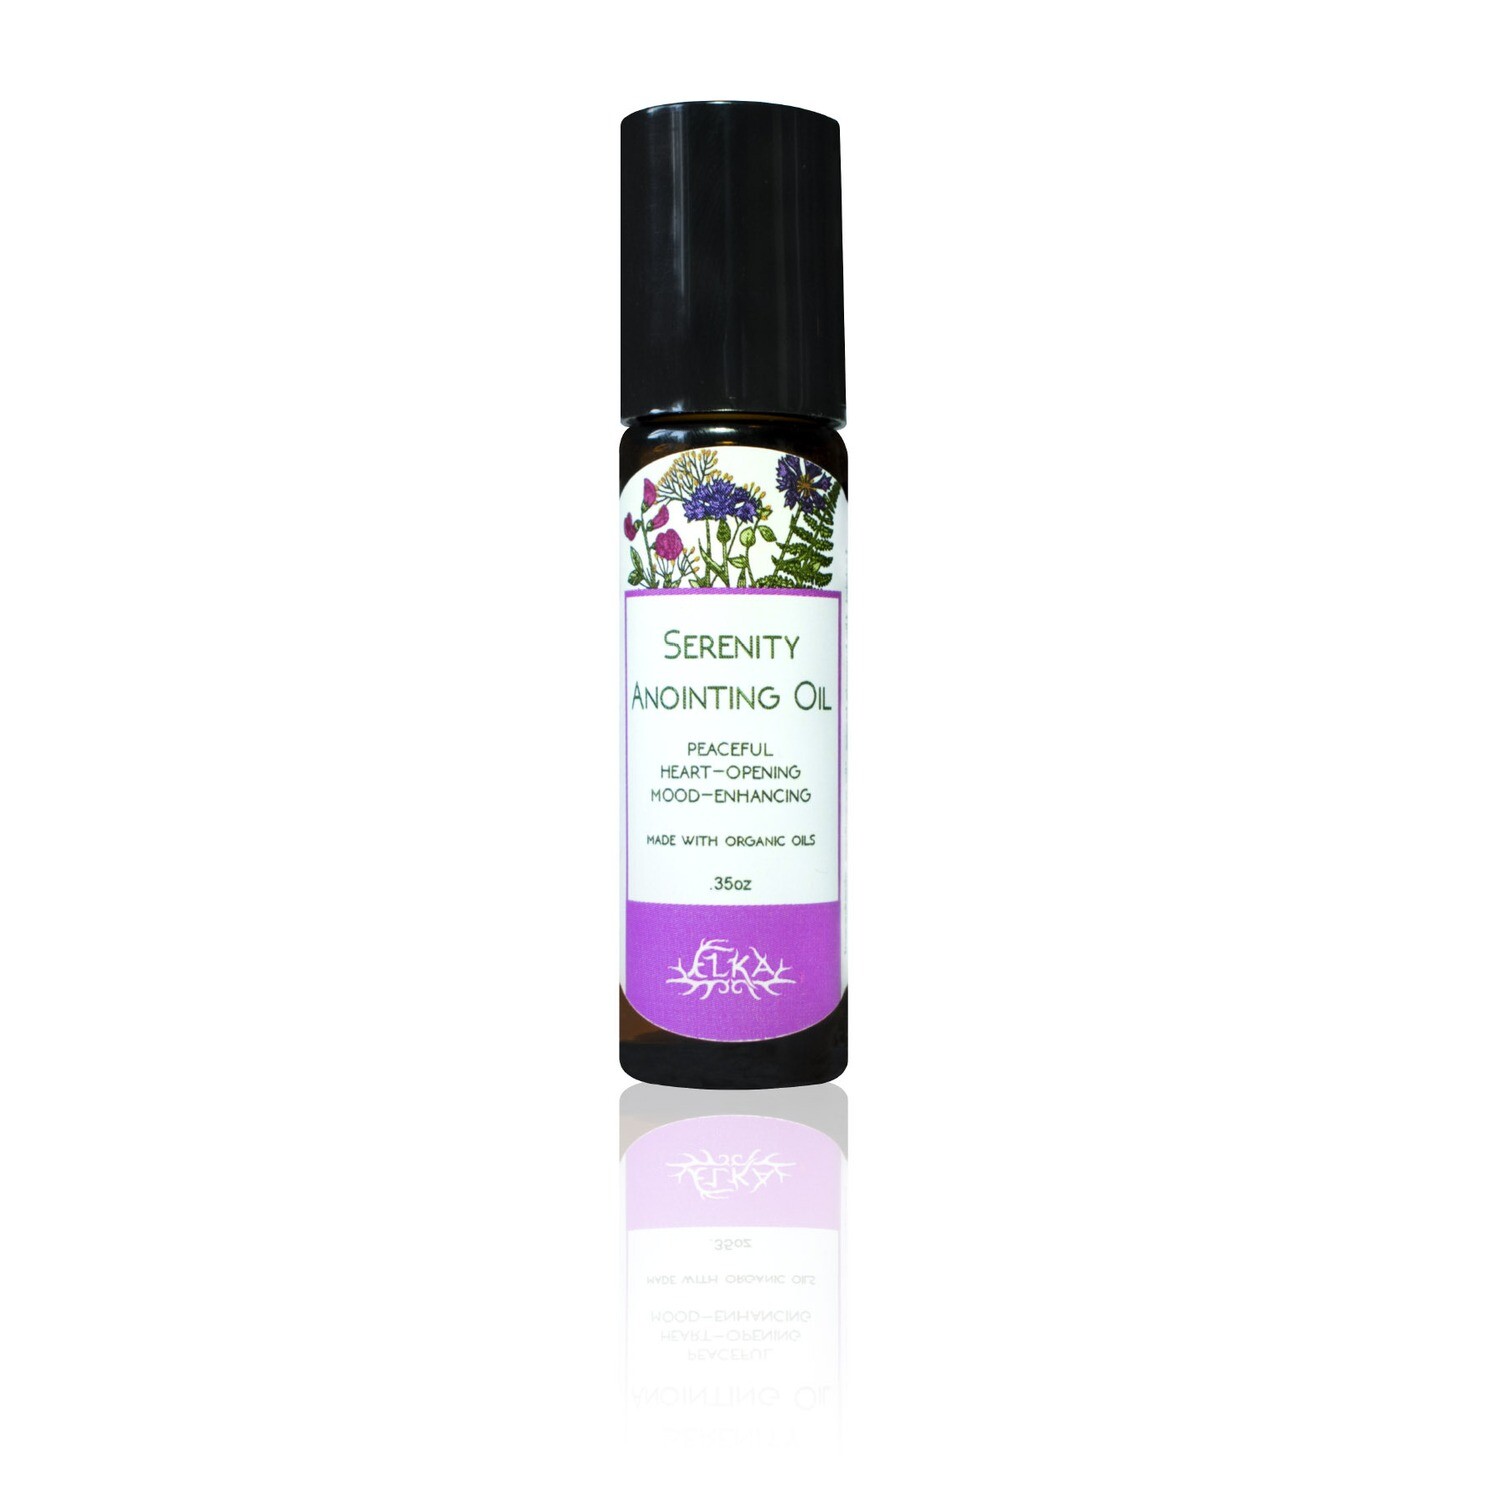 Serenity Anointing Oil, Roll-On Essential Oil Blend